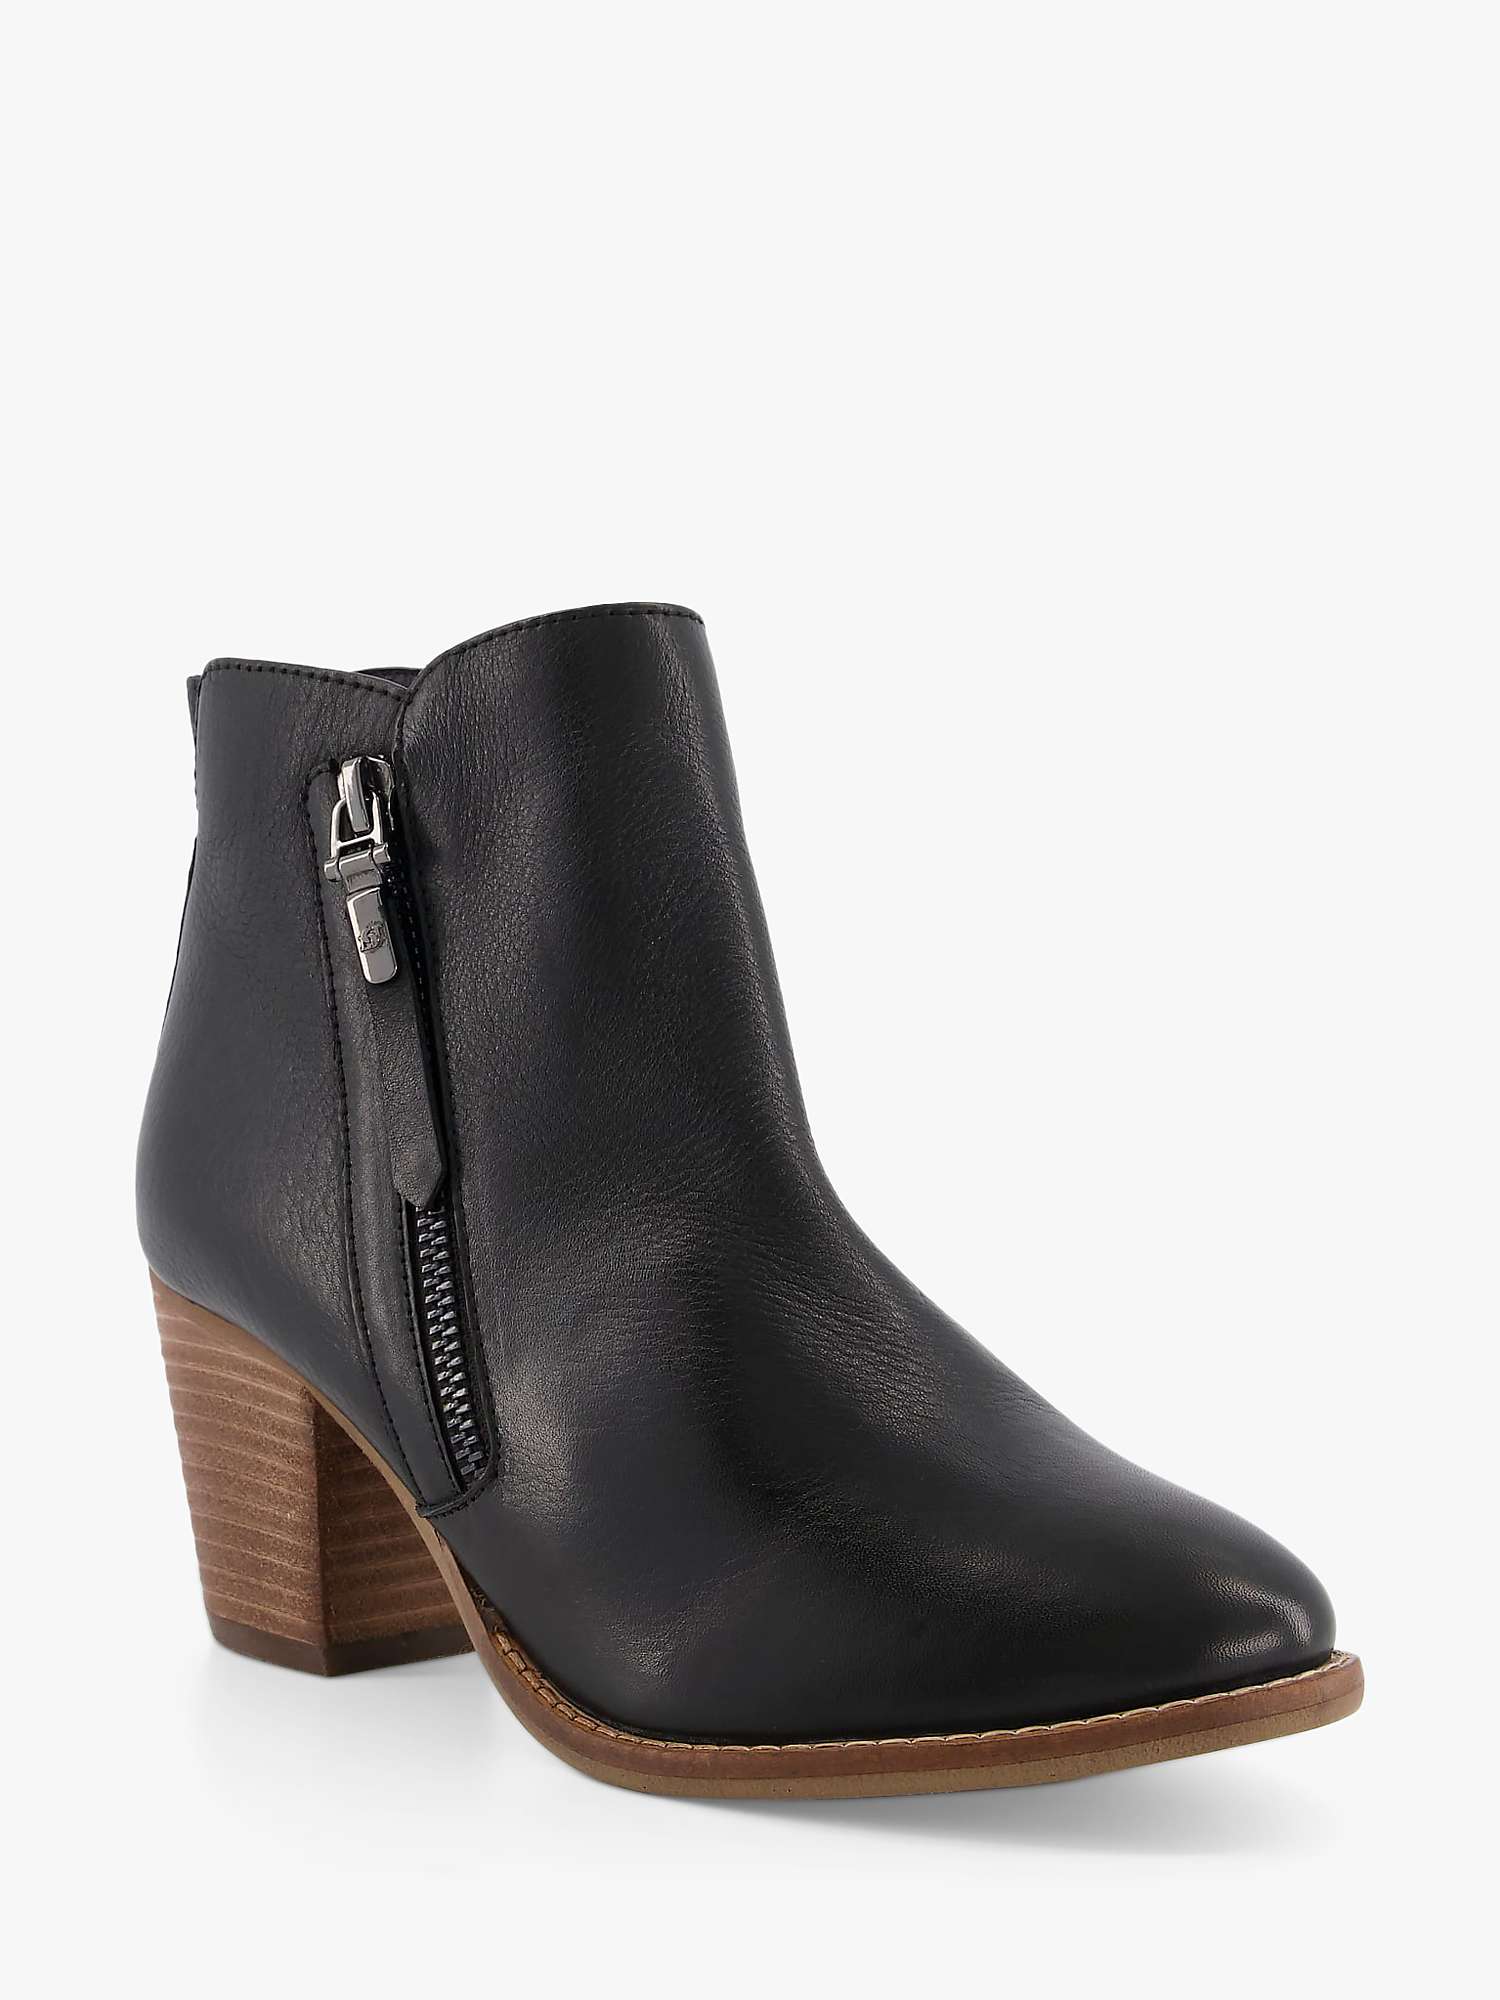 Buy Dune Paice Leather Side Zip Ankle Boots, Black Online at johnlewis.com